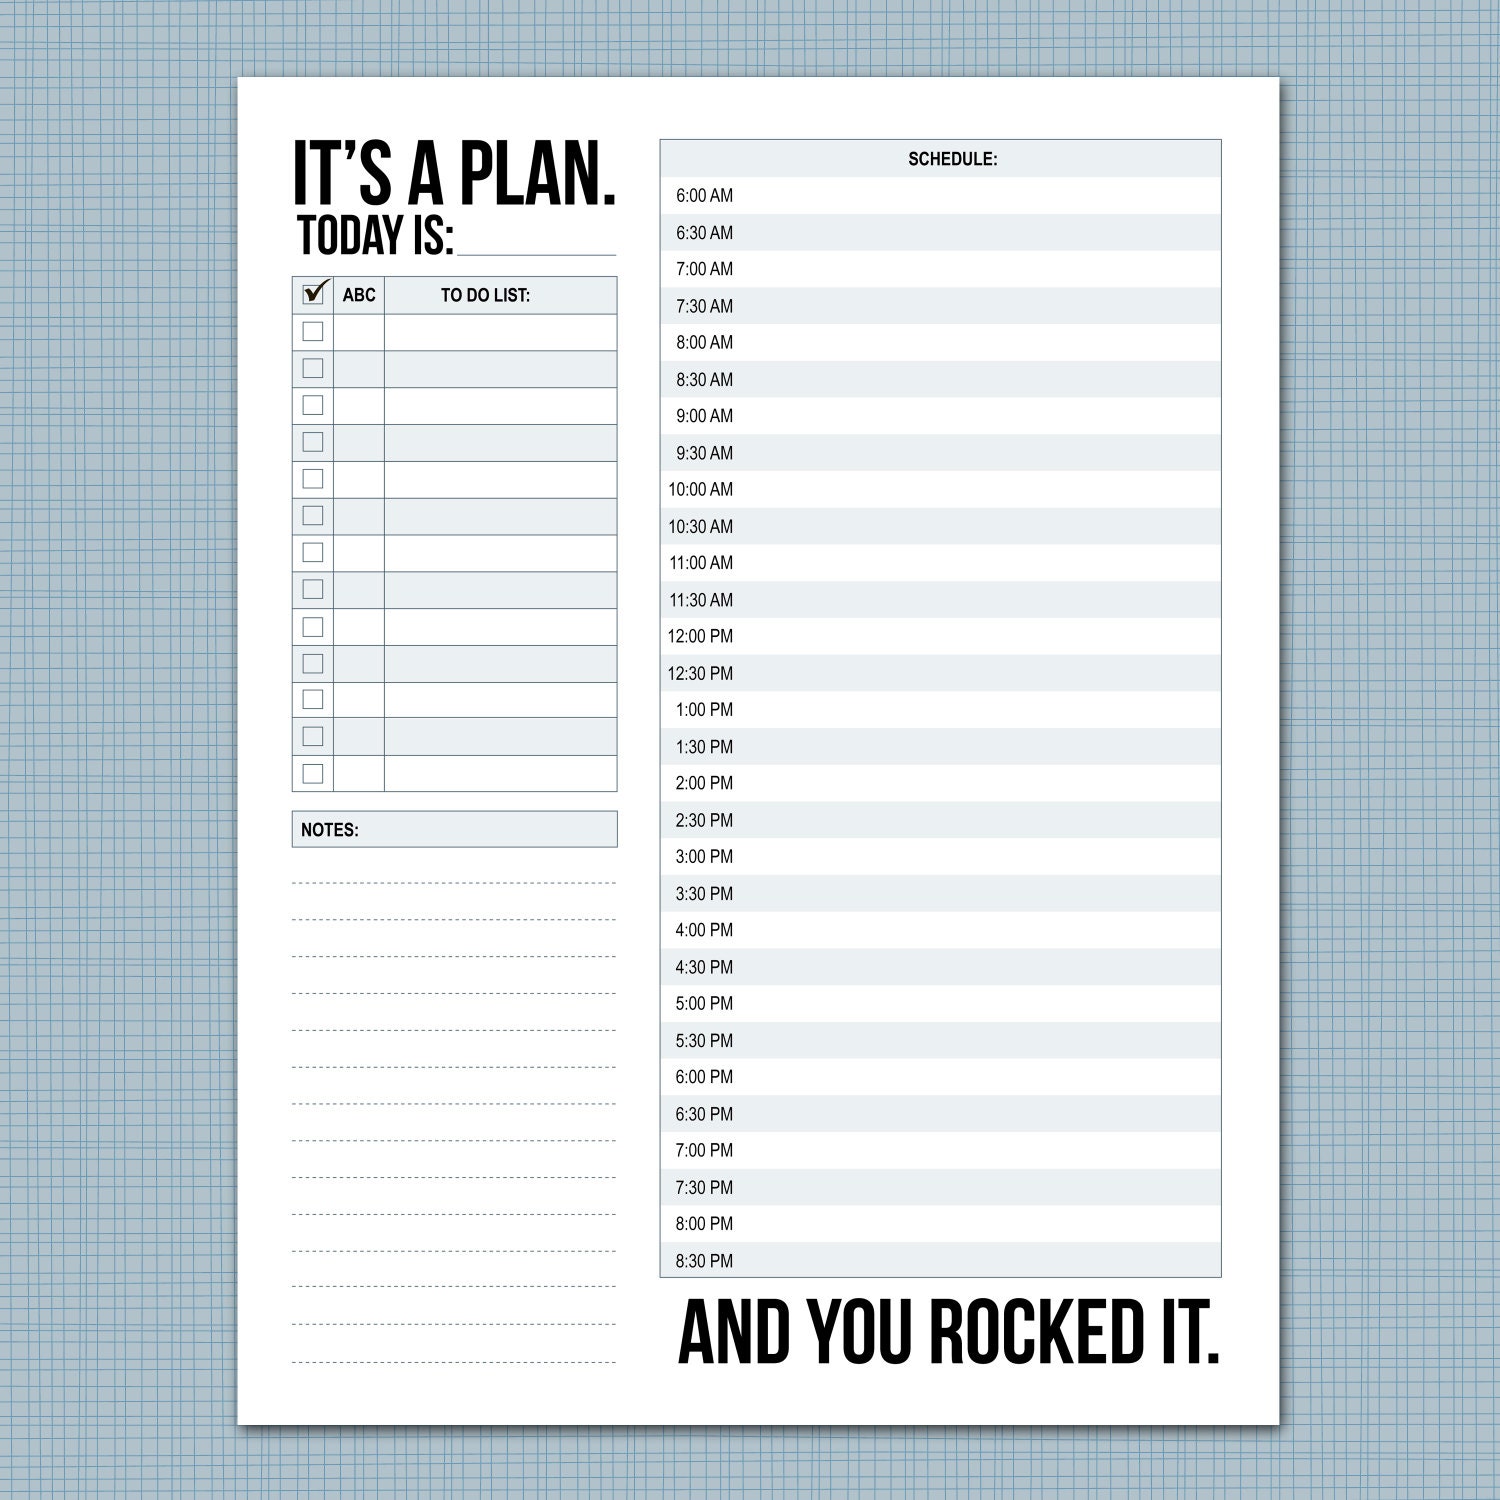 it #39 s a plan: daily schedule printable sheet by microdesign on Etsy